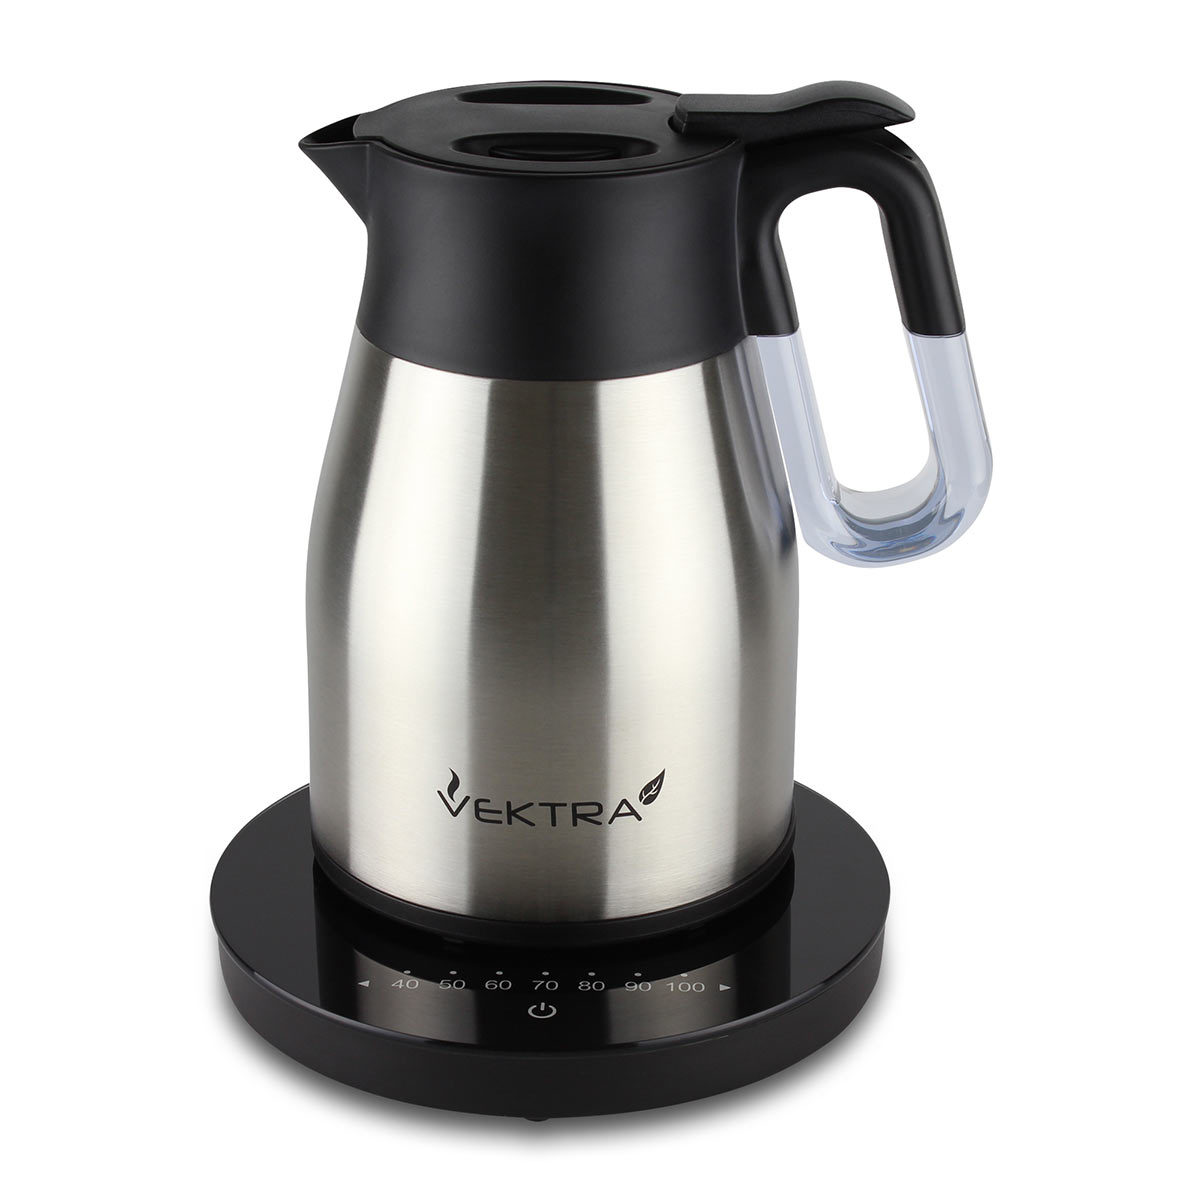 Vektra Temperature Controlled Eco Vacuum Kettle in Stainless Steel, VEK-1504